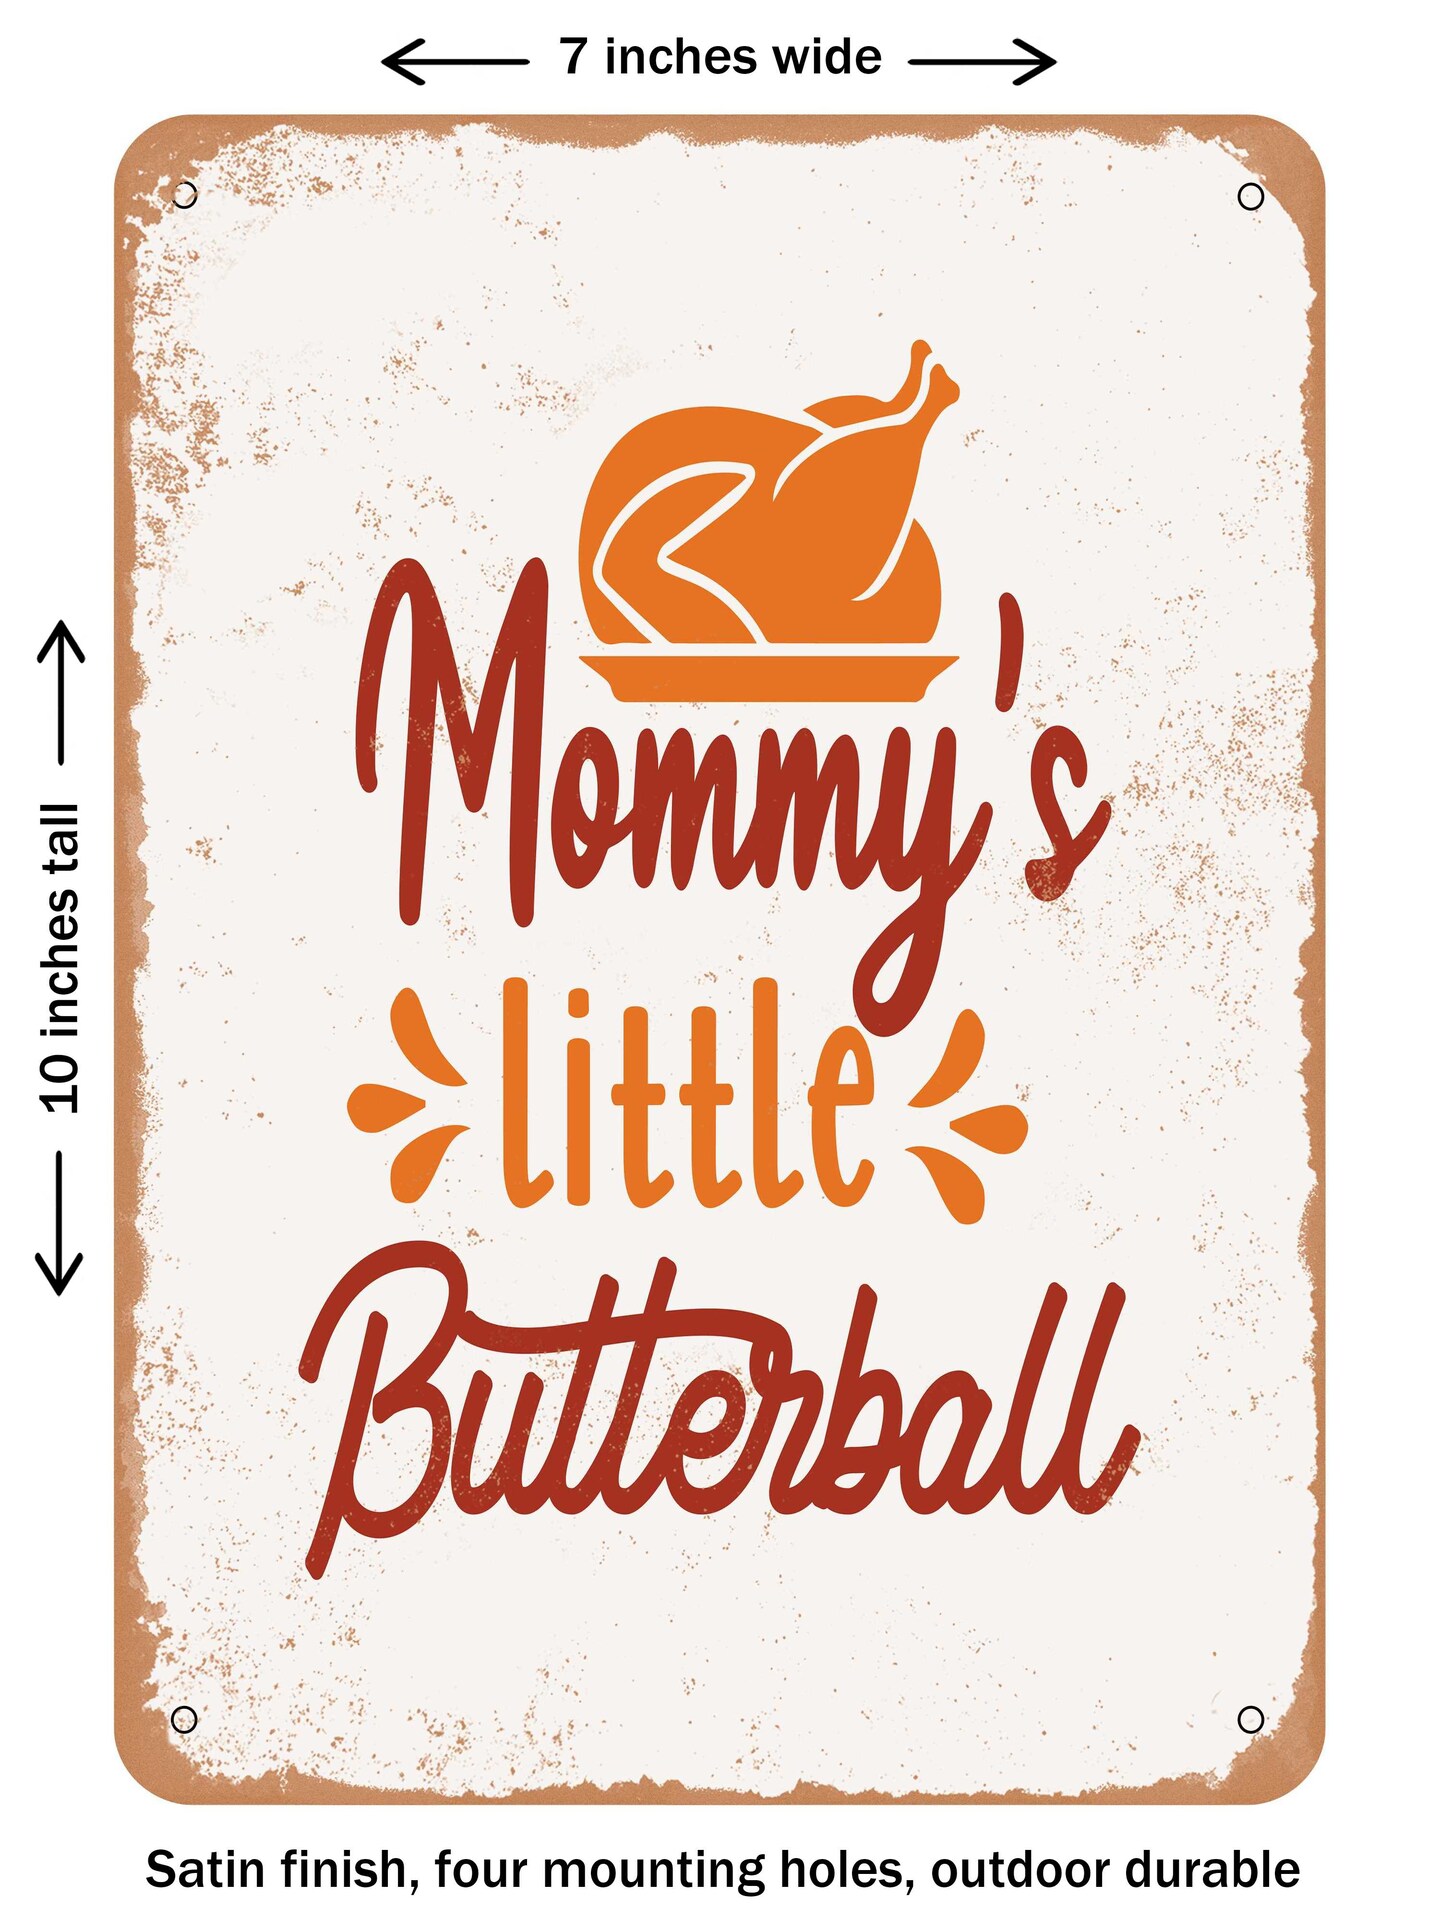 DECORATIVE METAL SIGN - Mommy&#x27;s Little Butterball  - Vintage Rusty Look